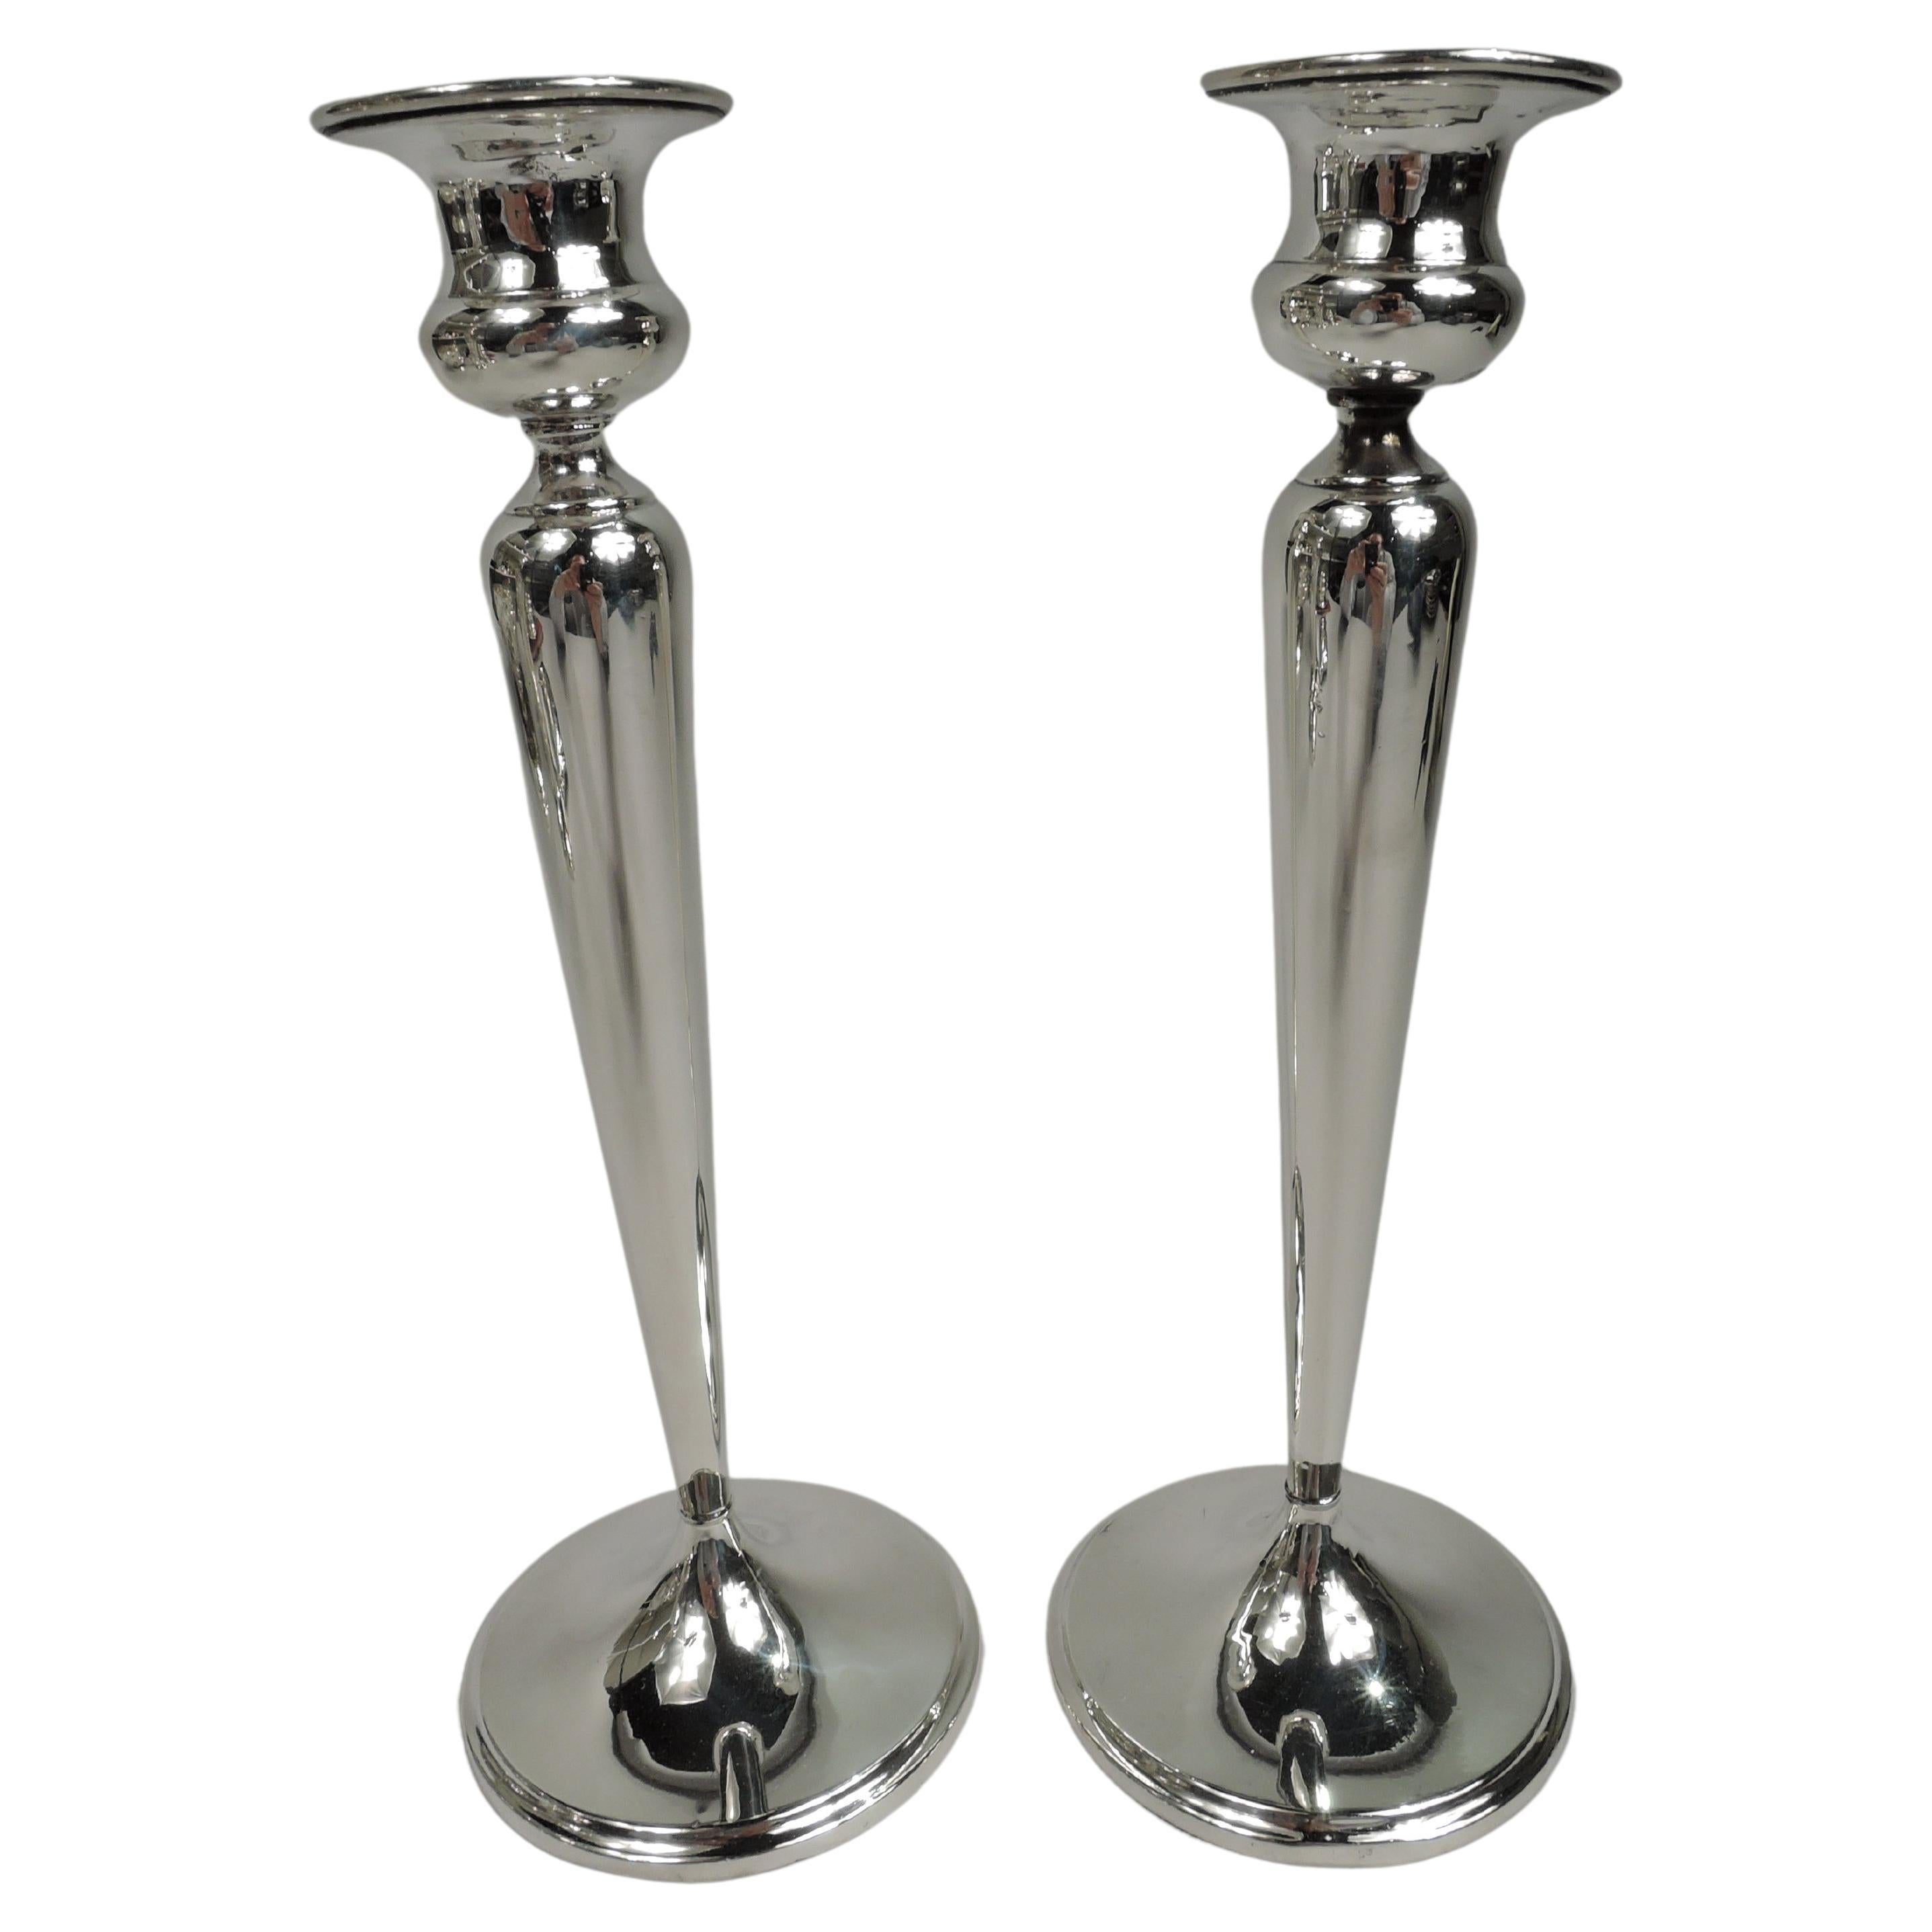 Farmhouse Wedding Table 9 12 H x 5 W Tall Silver Candleholders Pair England Silver Plated Candlesticks Engraved with S